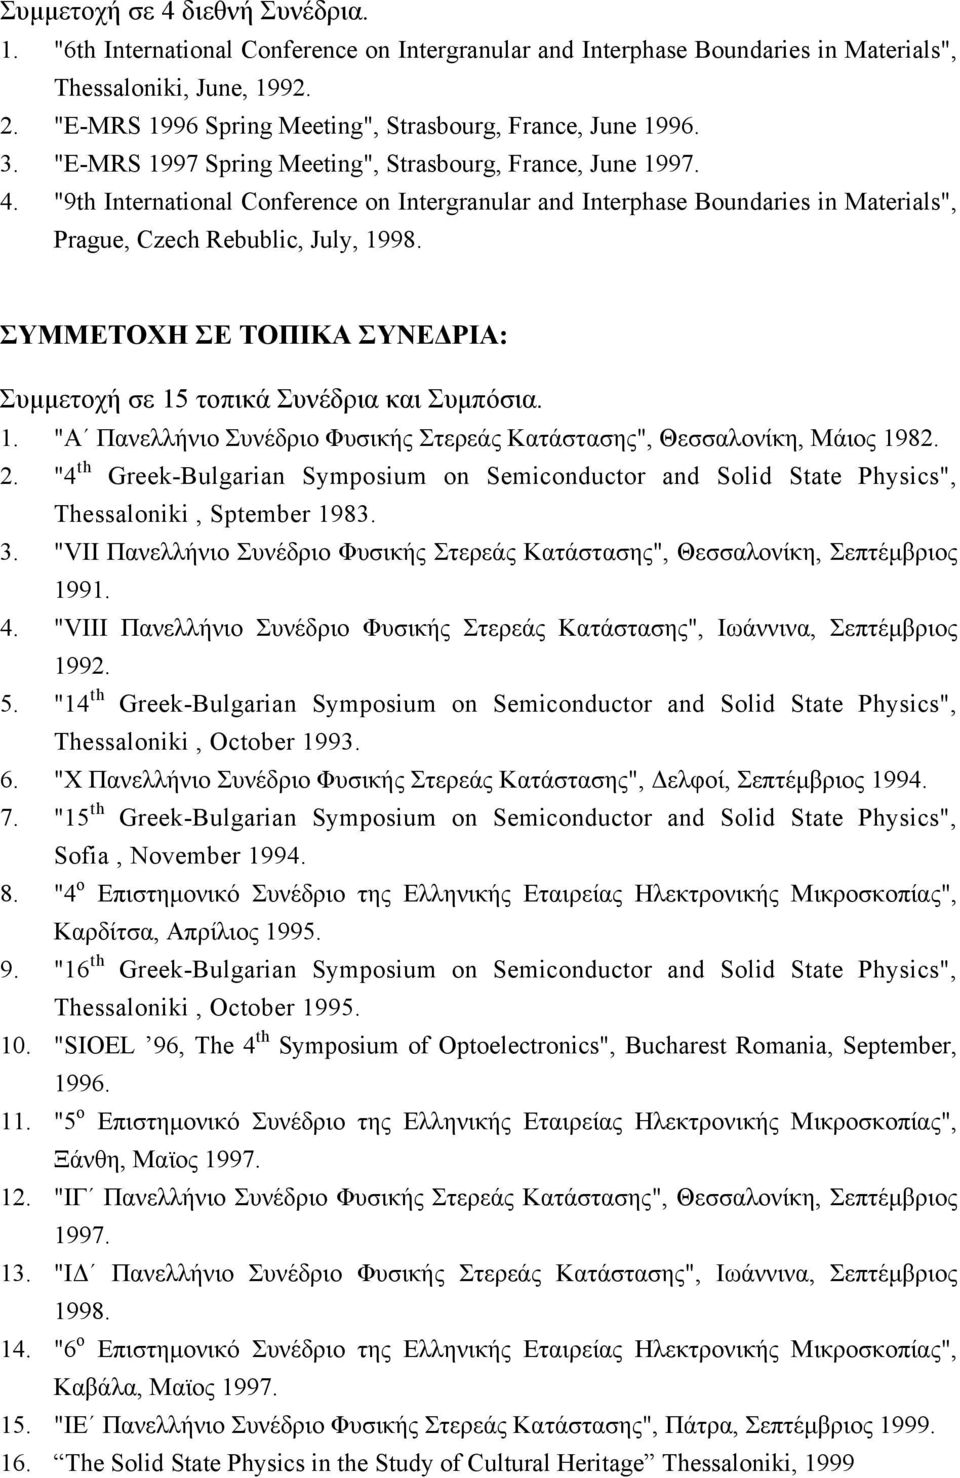 "9th International Conference on Intergranular and Interphase Boundaries in Materials", Prague, Czech Rebublic, July, 1998. ΣΥΜΜΕΤΟΧΗ ΣΕ ΤΟΠΙΚΑ ΣΥΝΕ ΡΙΑ: Συµµετοχή σε 15 τοπικά Συνέδρια και Συµπόσια.